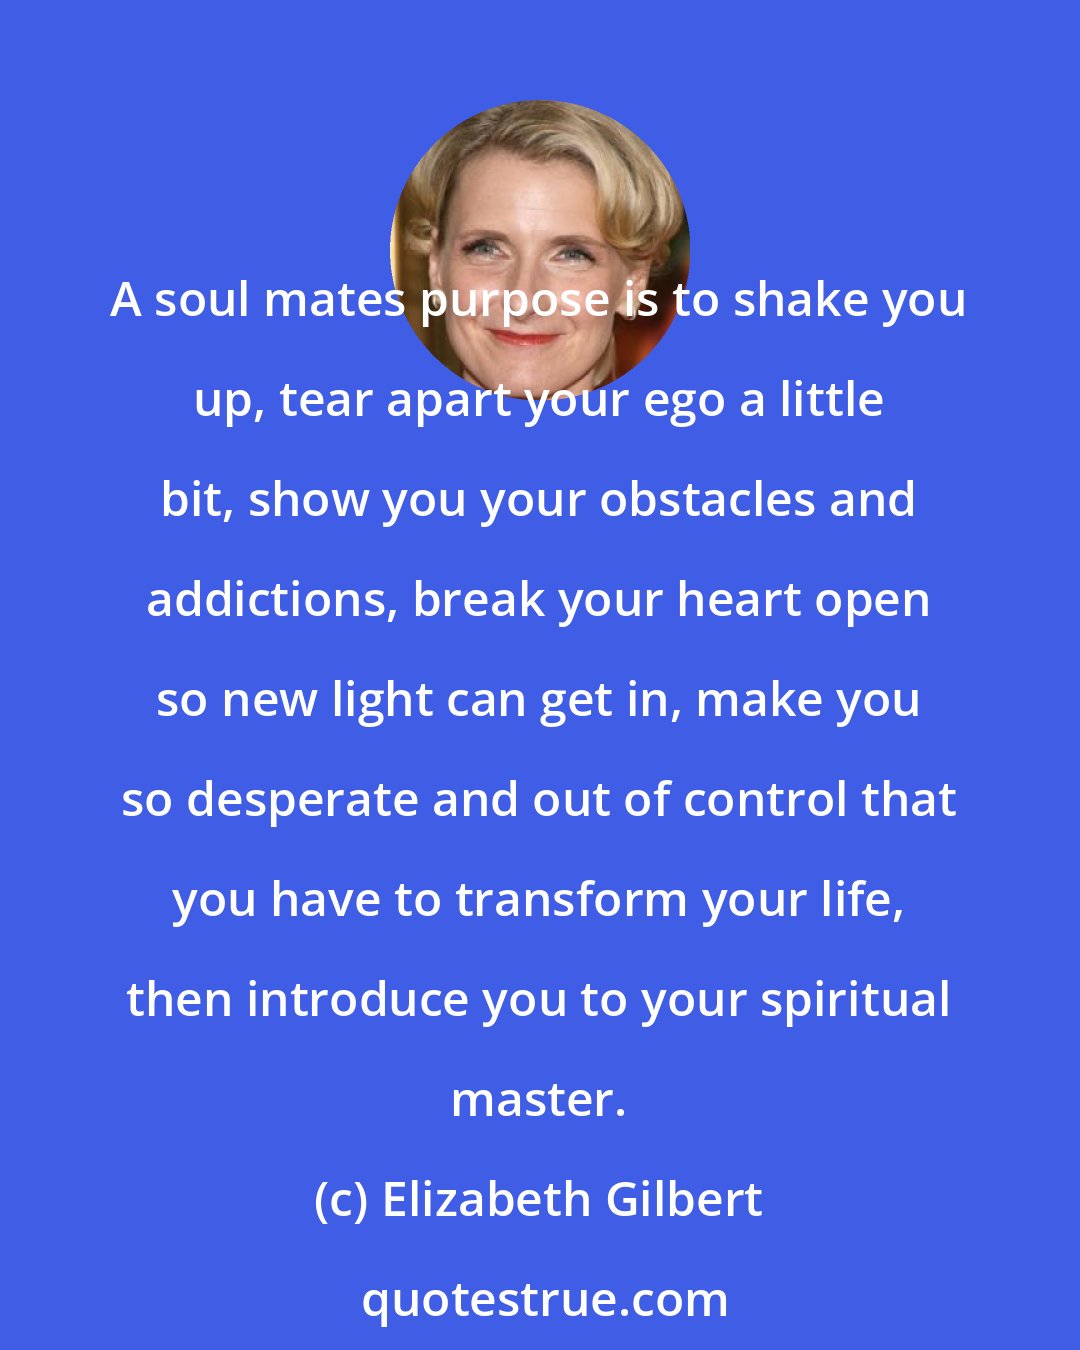 Elizabeth Gilbert: A soul mates purpose is to shake you up, tear apart your ego a little bit, show you your obstacles and addictions, break your heart open so new light can get in, make you so desperate and out of control that you have to transform your life, then introduce you to your spiritual master.